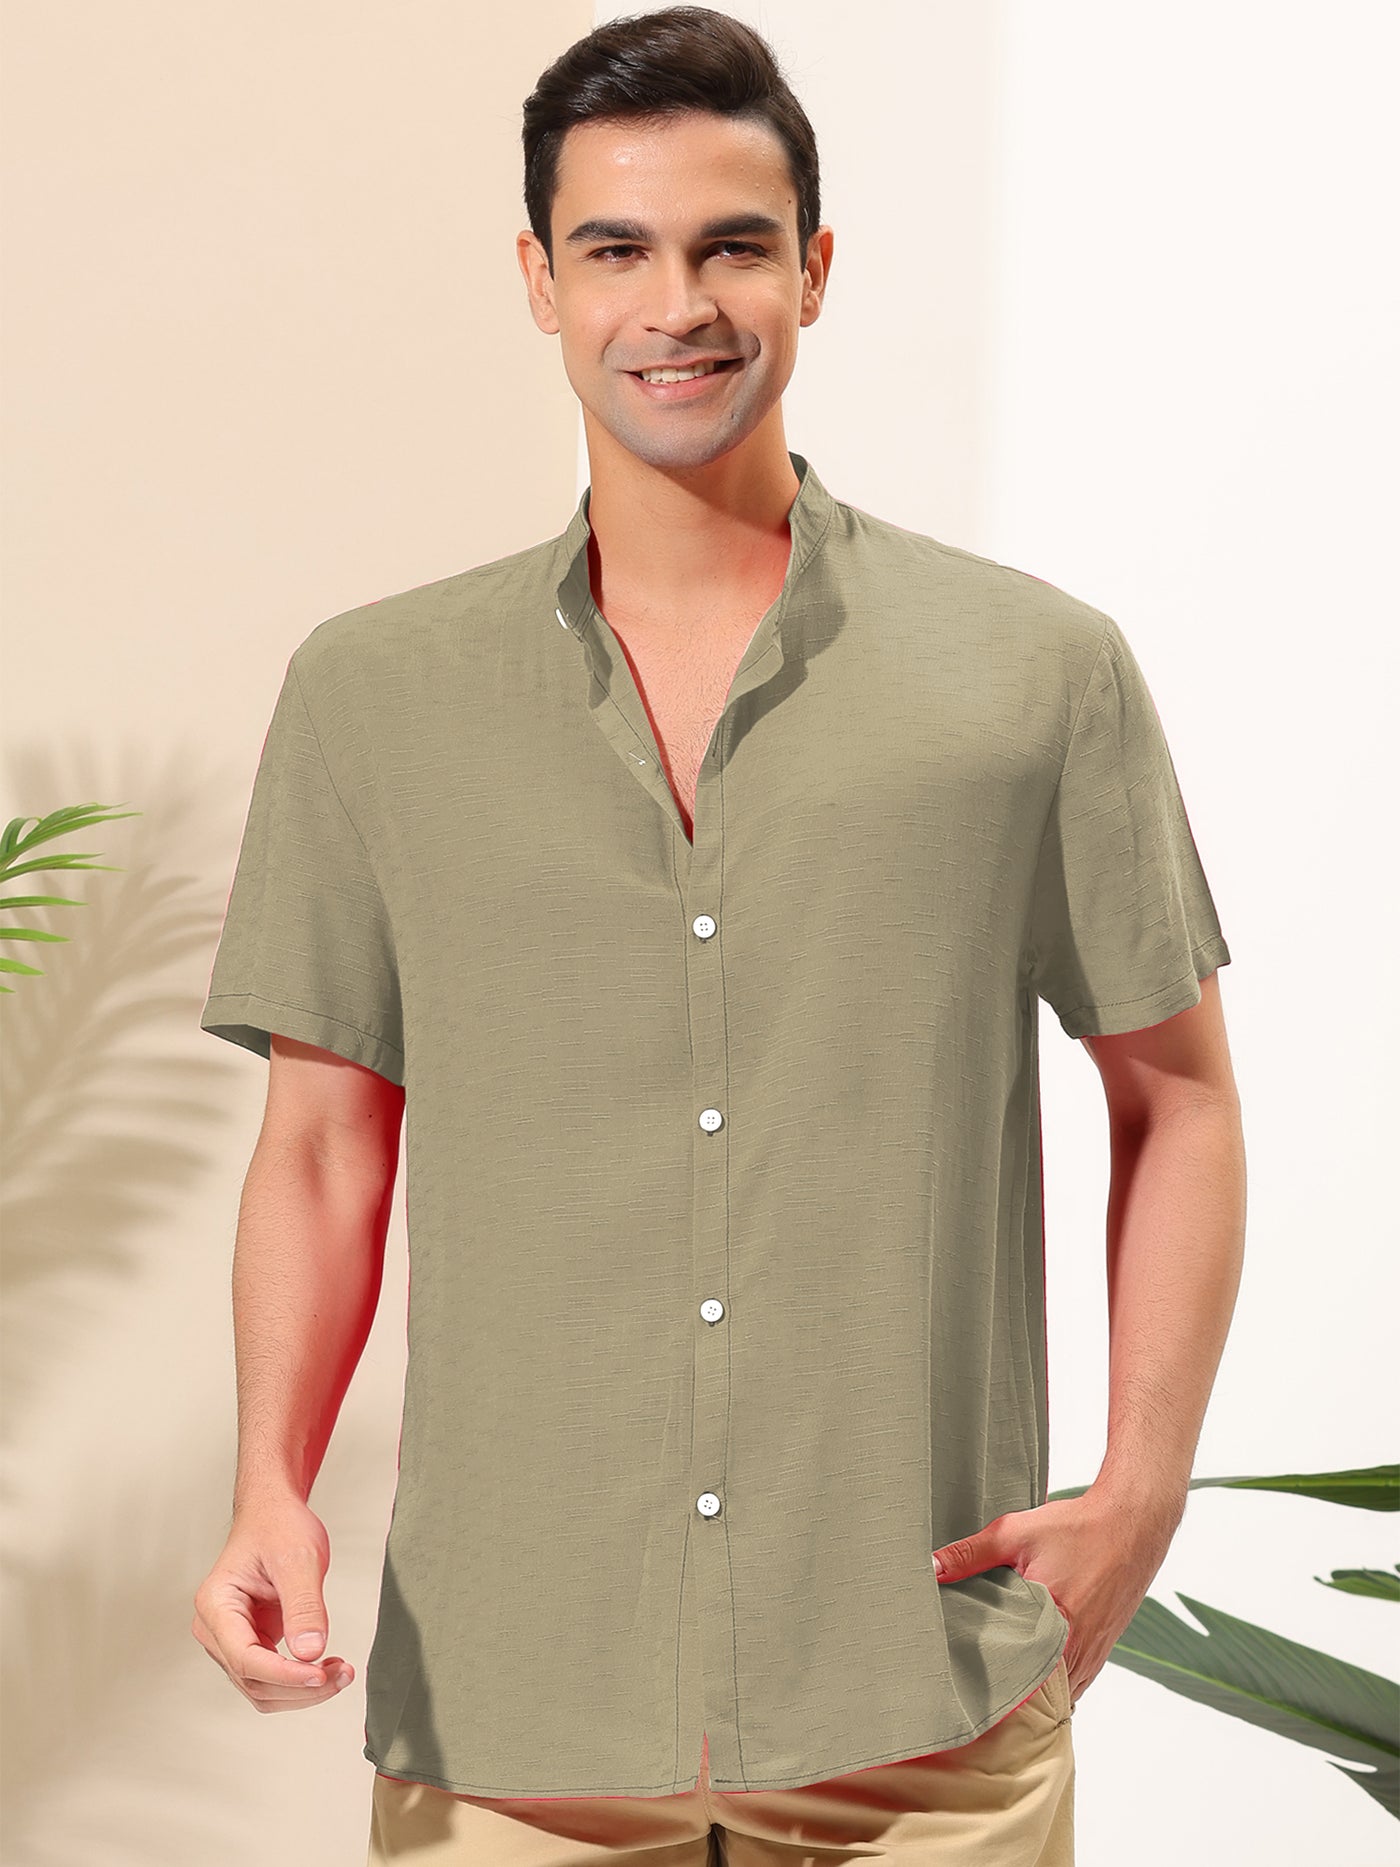 Bublédon Linen Banded Collar Short Sleeve Button Solid Shirts